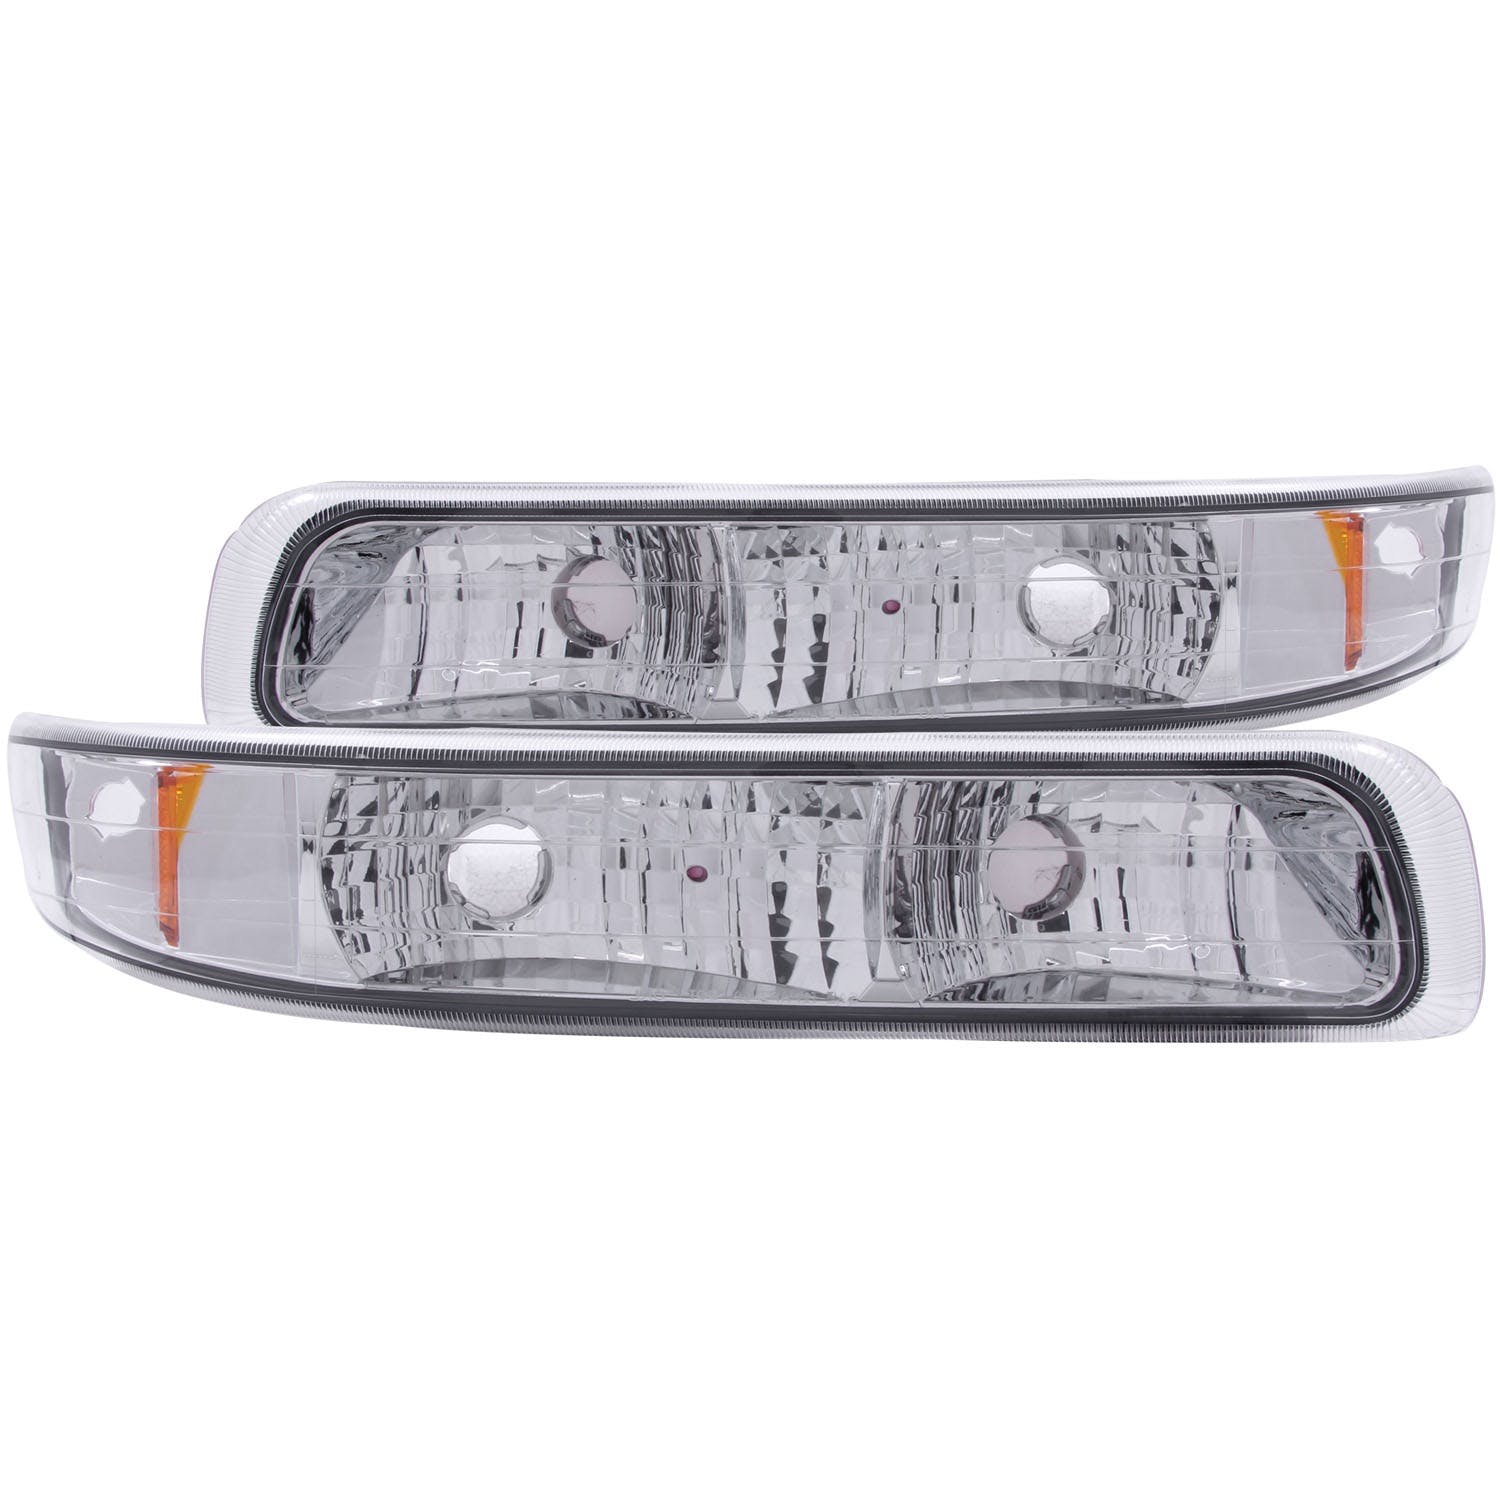 AnzoUSA 511064 Euro Parking Lights Chrome with Amber Reflector